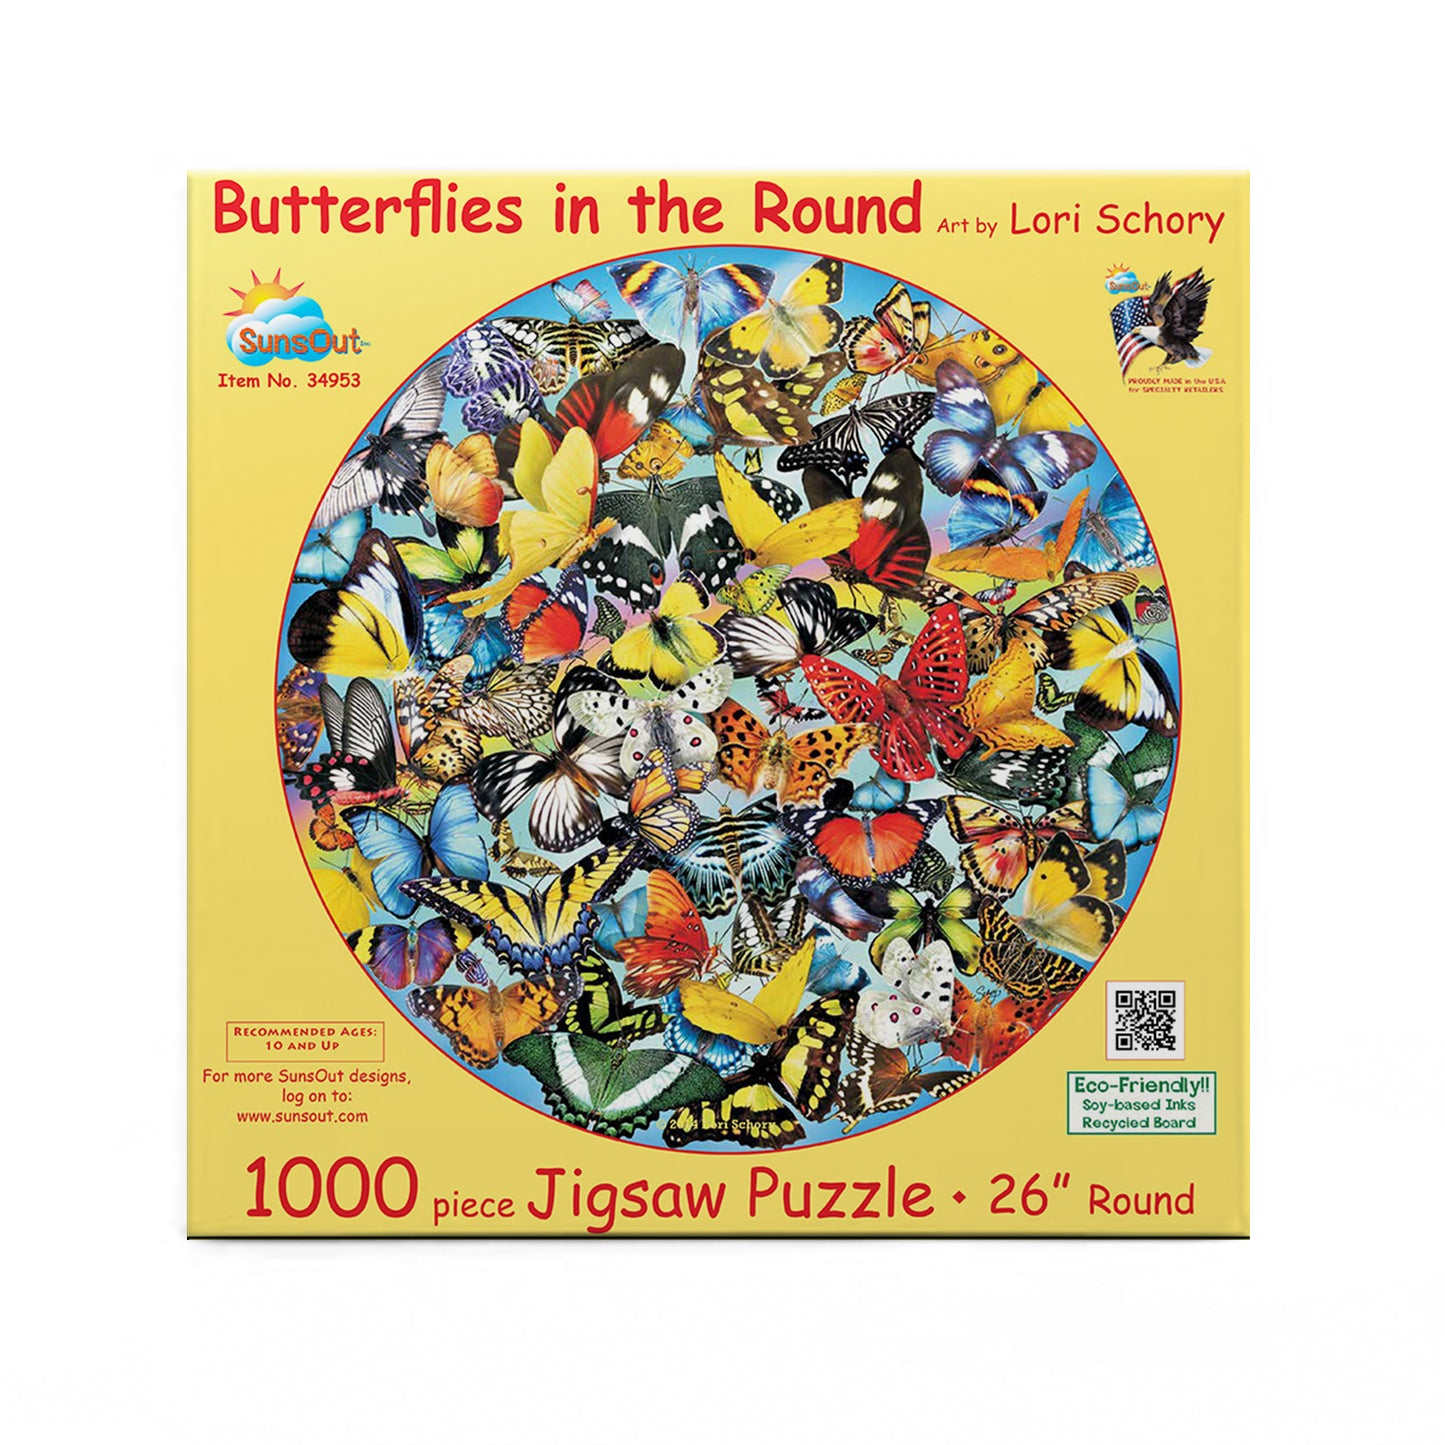 Butterflies in the Round - 1000 Piece Jigsaw Puzzle